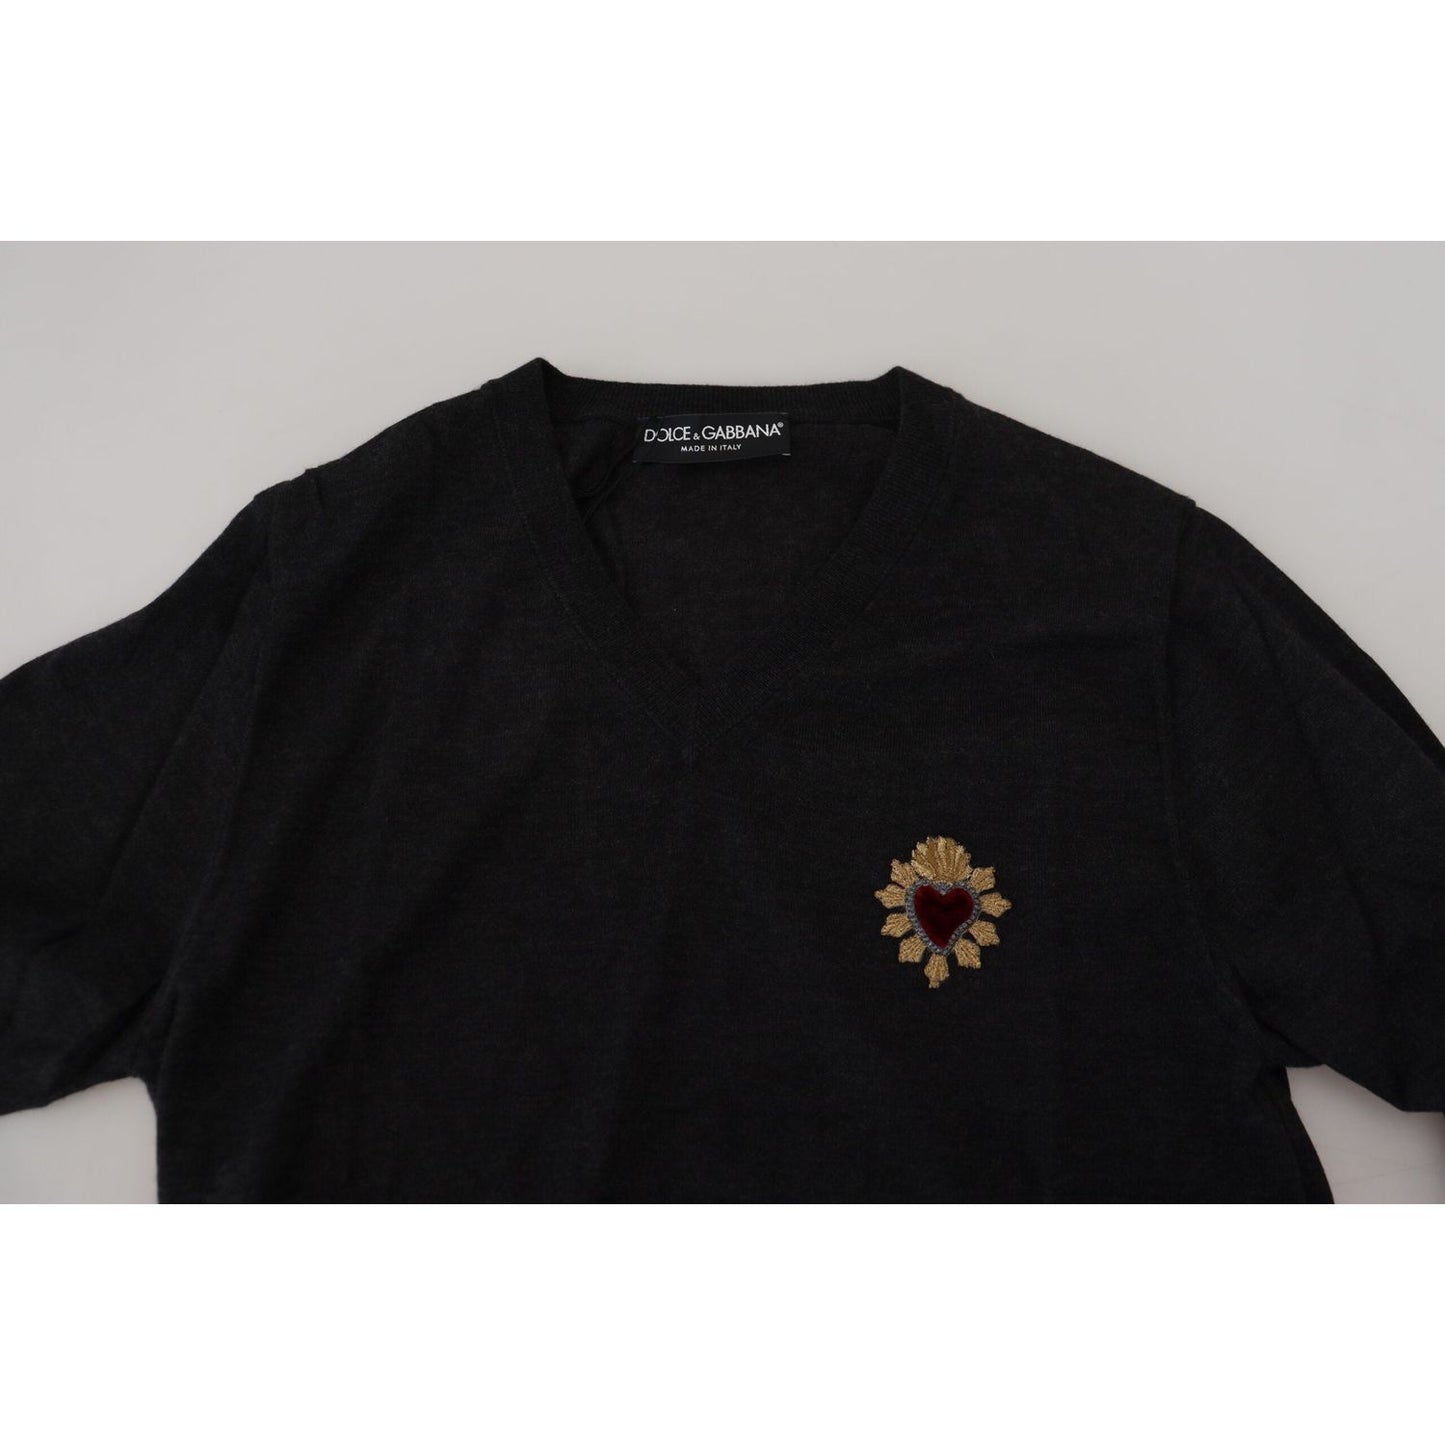 Dolce & Gabbana V-Neck Cashmere Sweater with Heart Embroidery gray-cashmere-v-neck-gold-heart-sweater IMG_2070-scaled-0b8bbcea-740.jpg